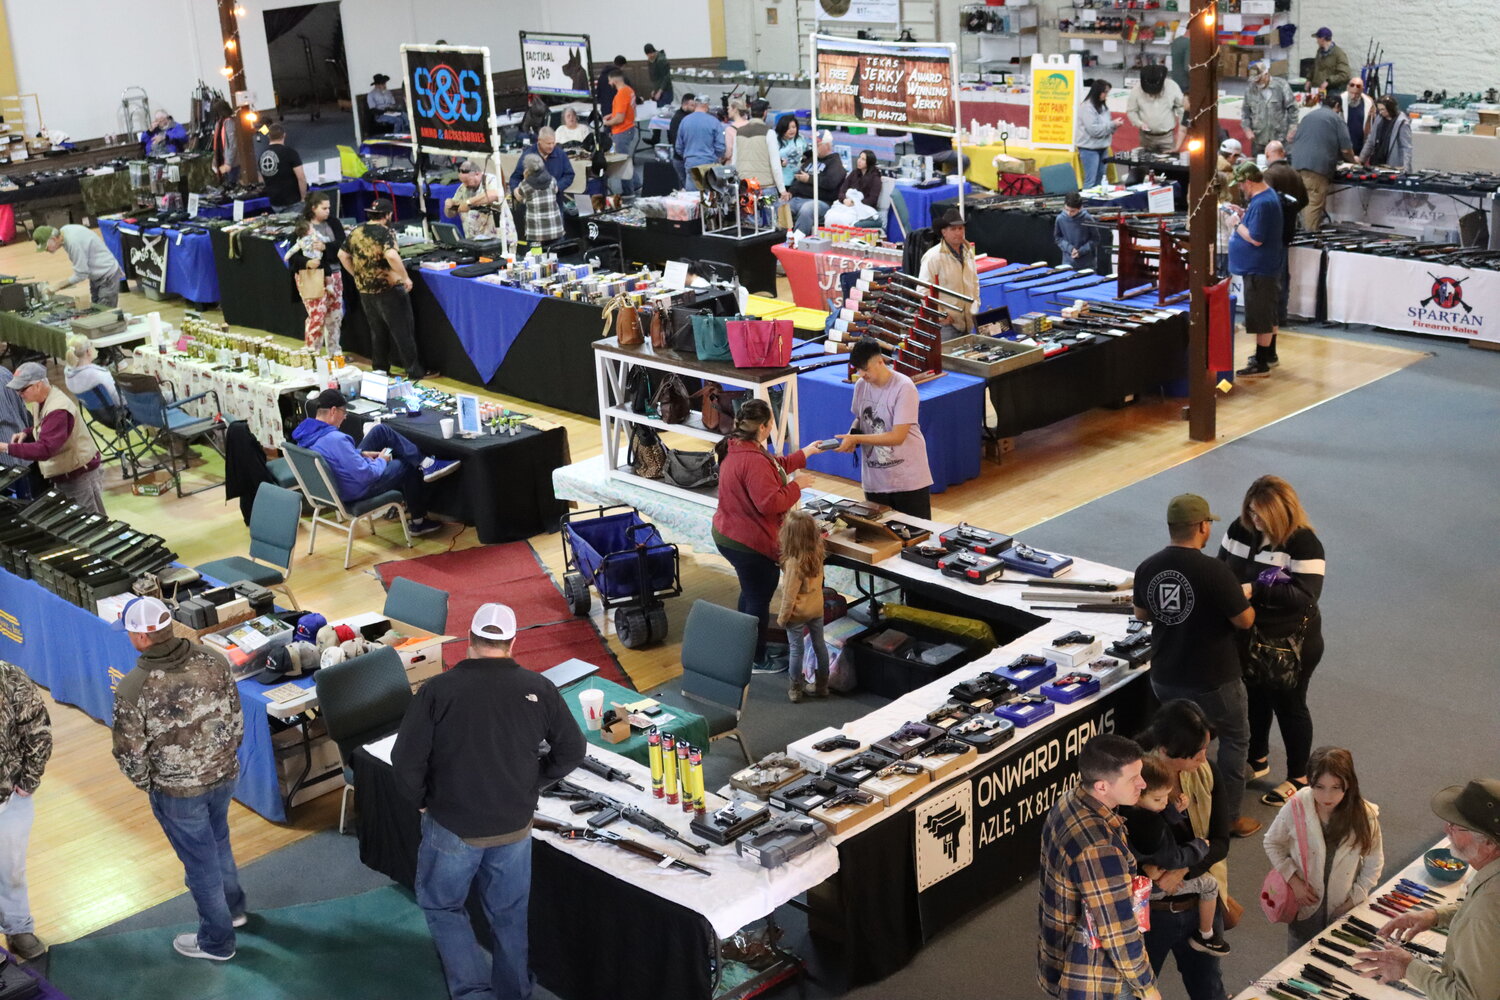 Azle business Onward Arms was front and center selling their wares. Whipp Farm Productions offers an opportunity for a wide range of businesses from across North Texas to congregate and reach customers in vendor fairs held about twice a month.